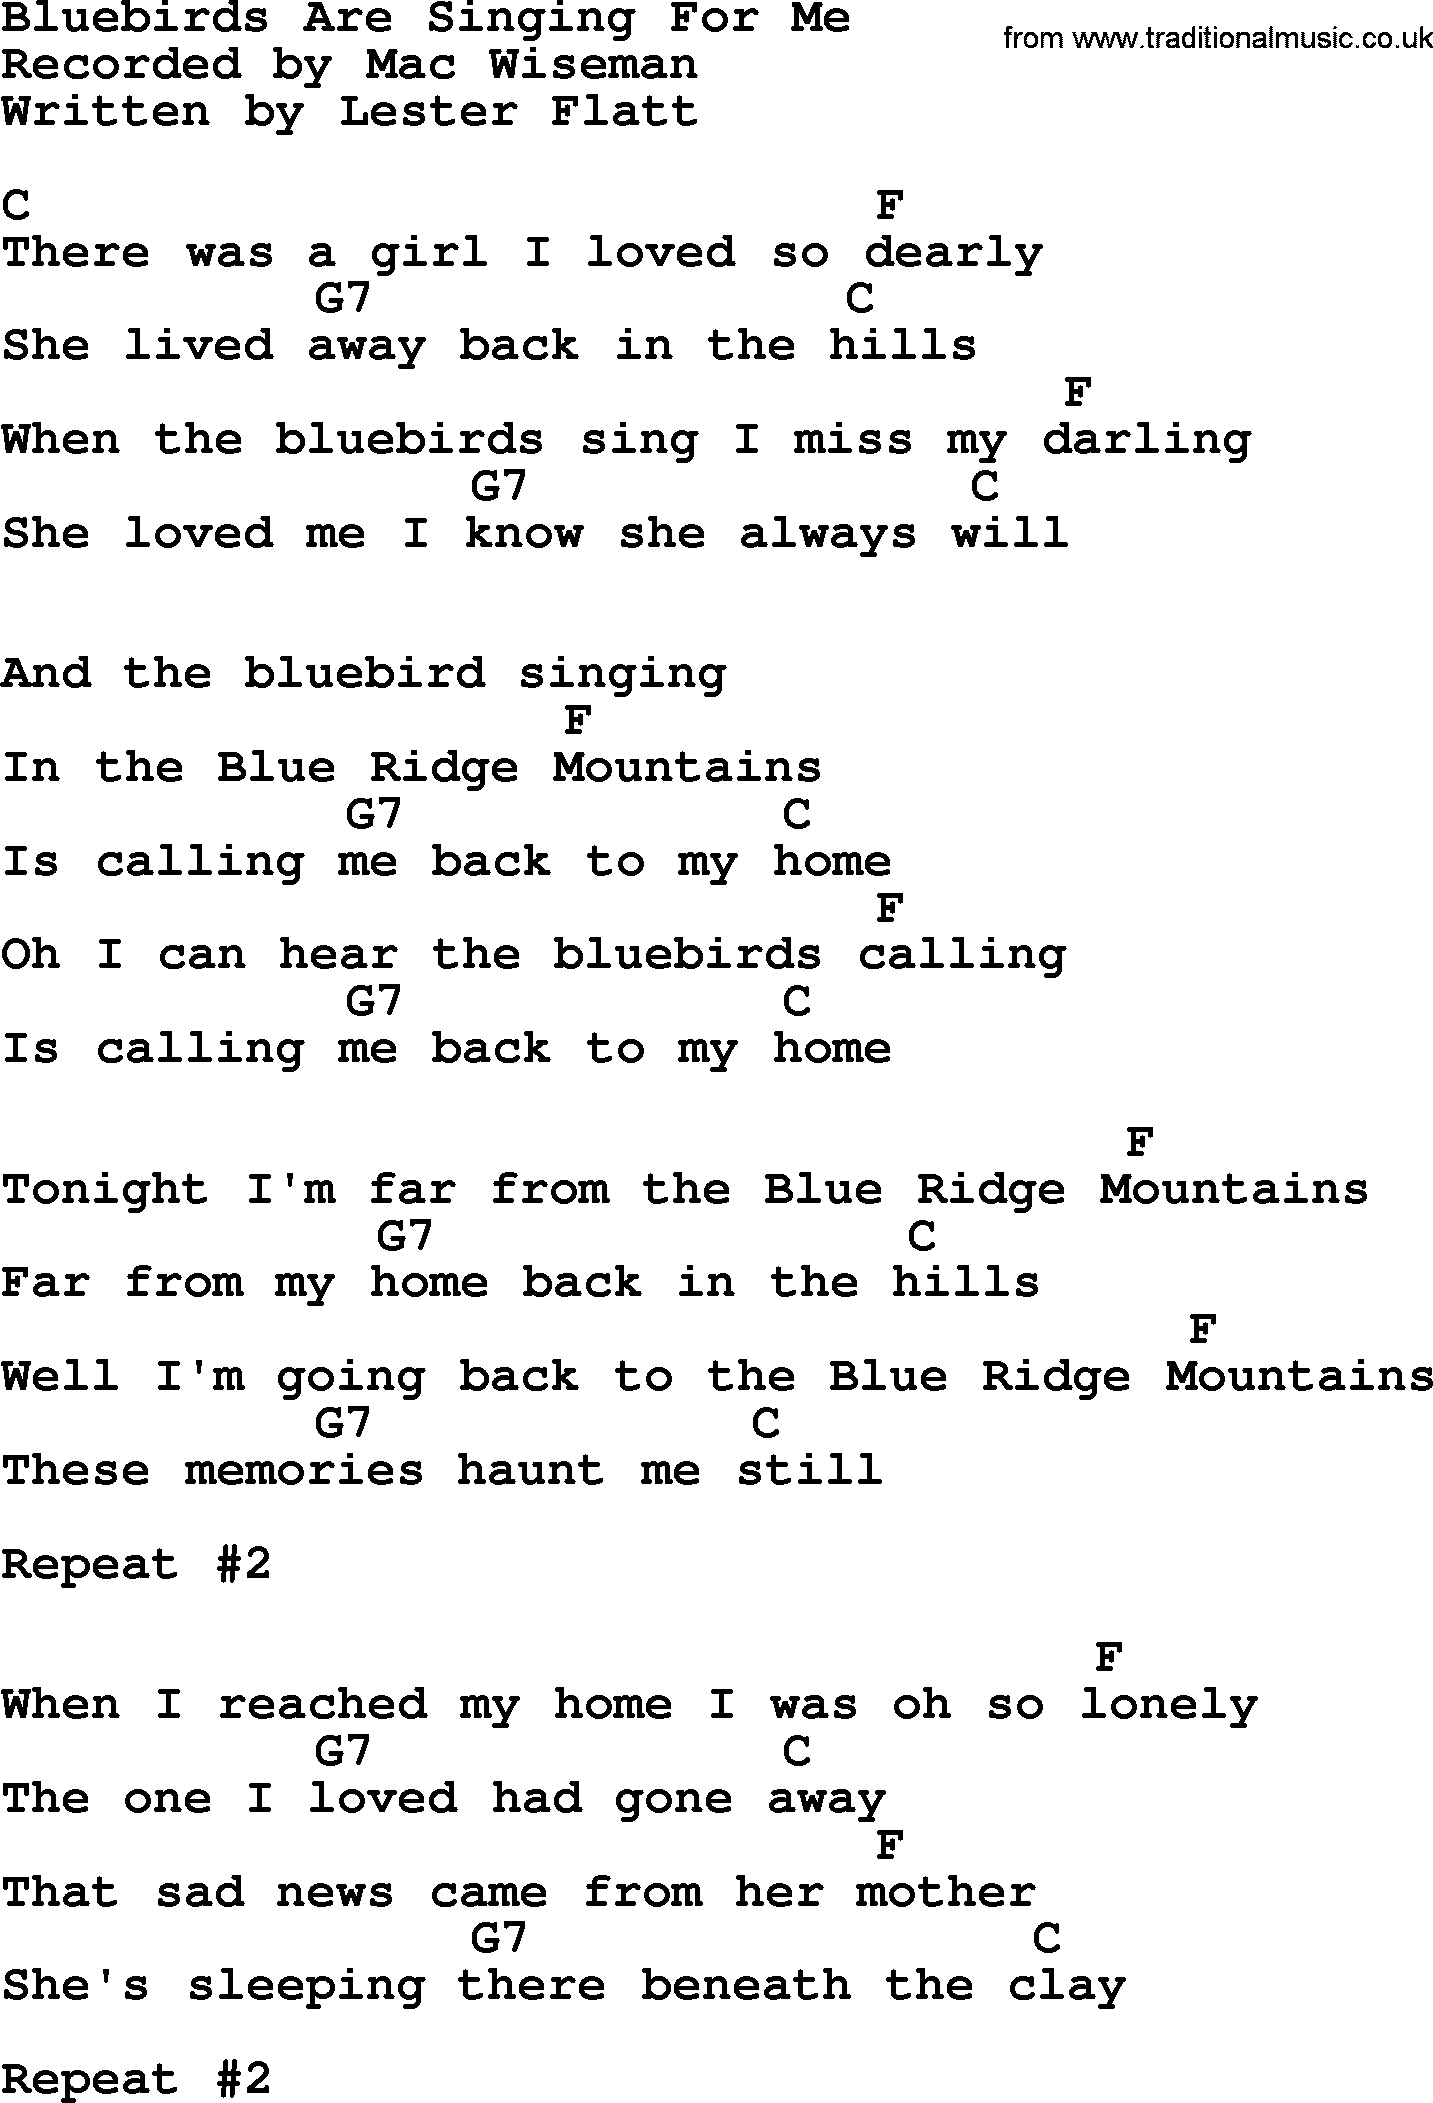 Bluegrass song: Bluebirds Are Singing For Me, lyrics and chords